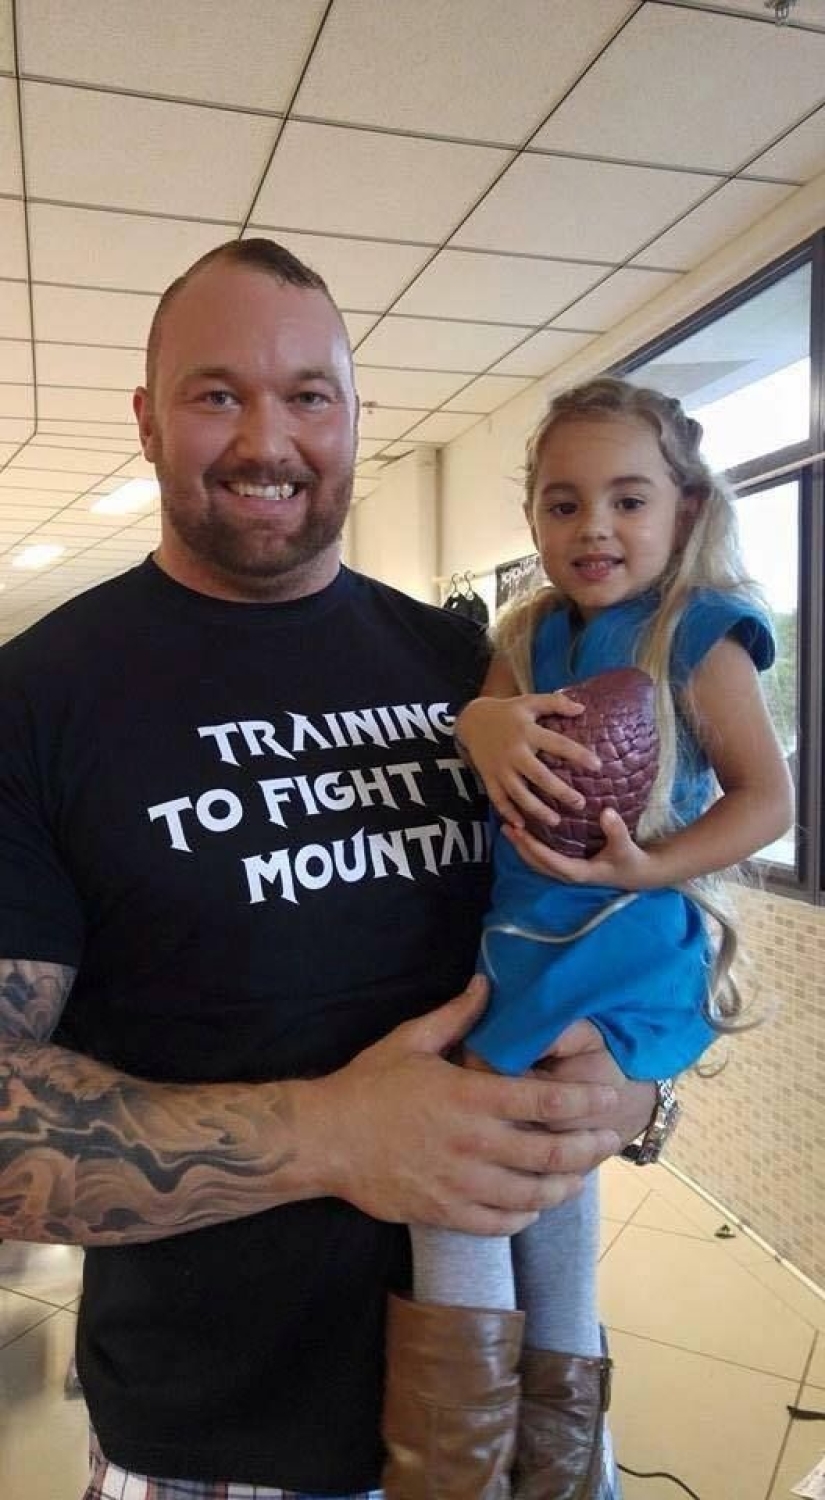 The hill from the rock: The mountain from "Game of Thrones" and his miniature wife are waiting for the birth of their son